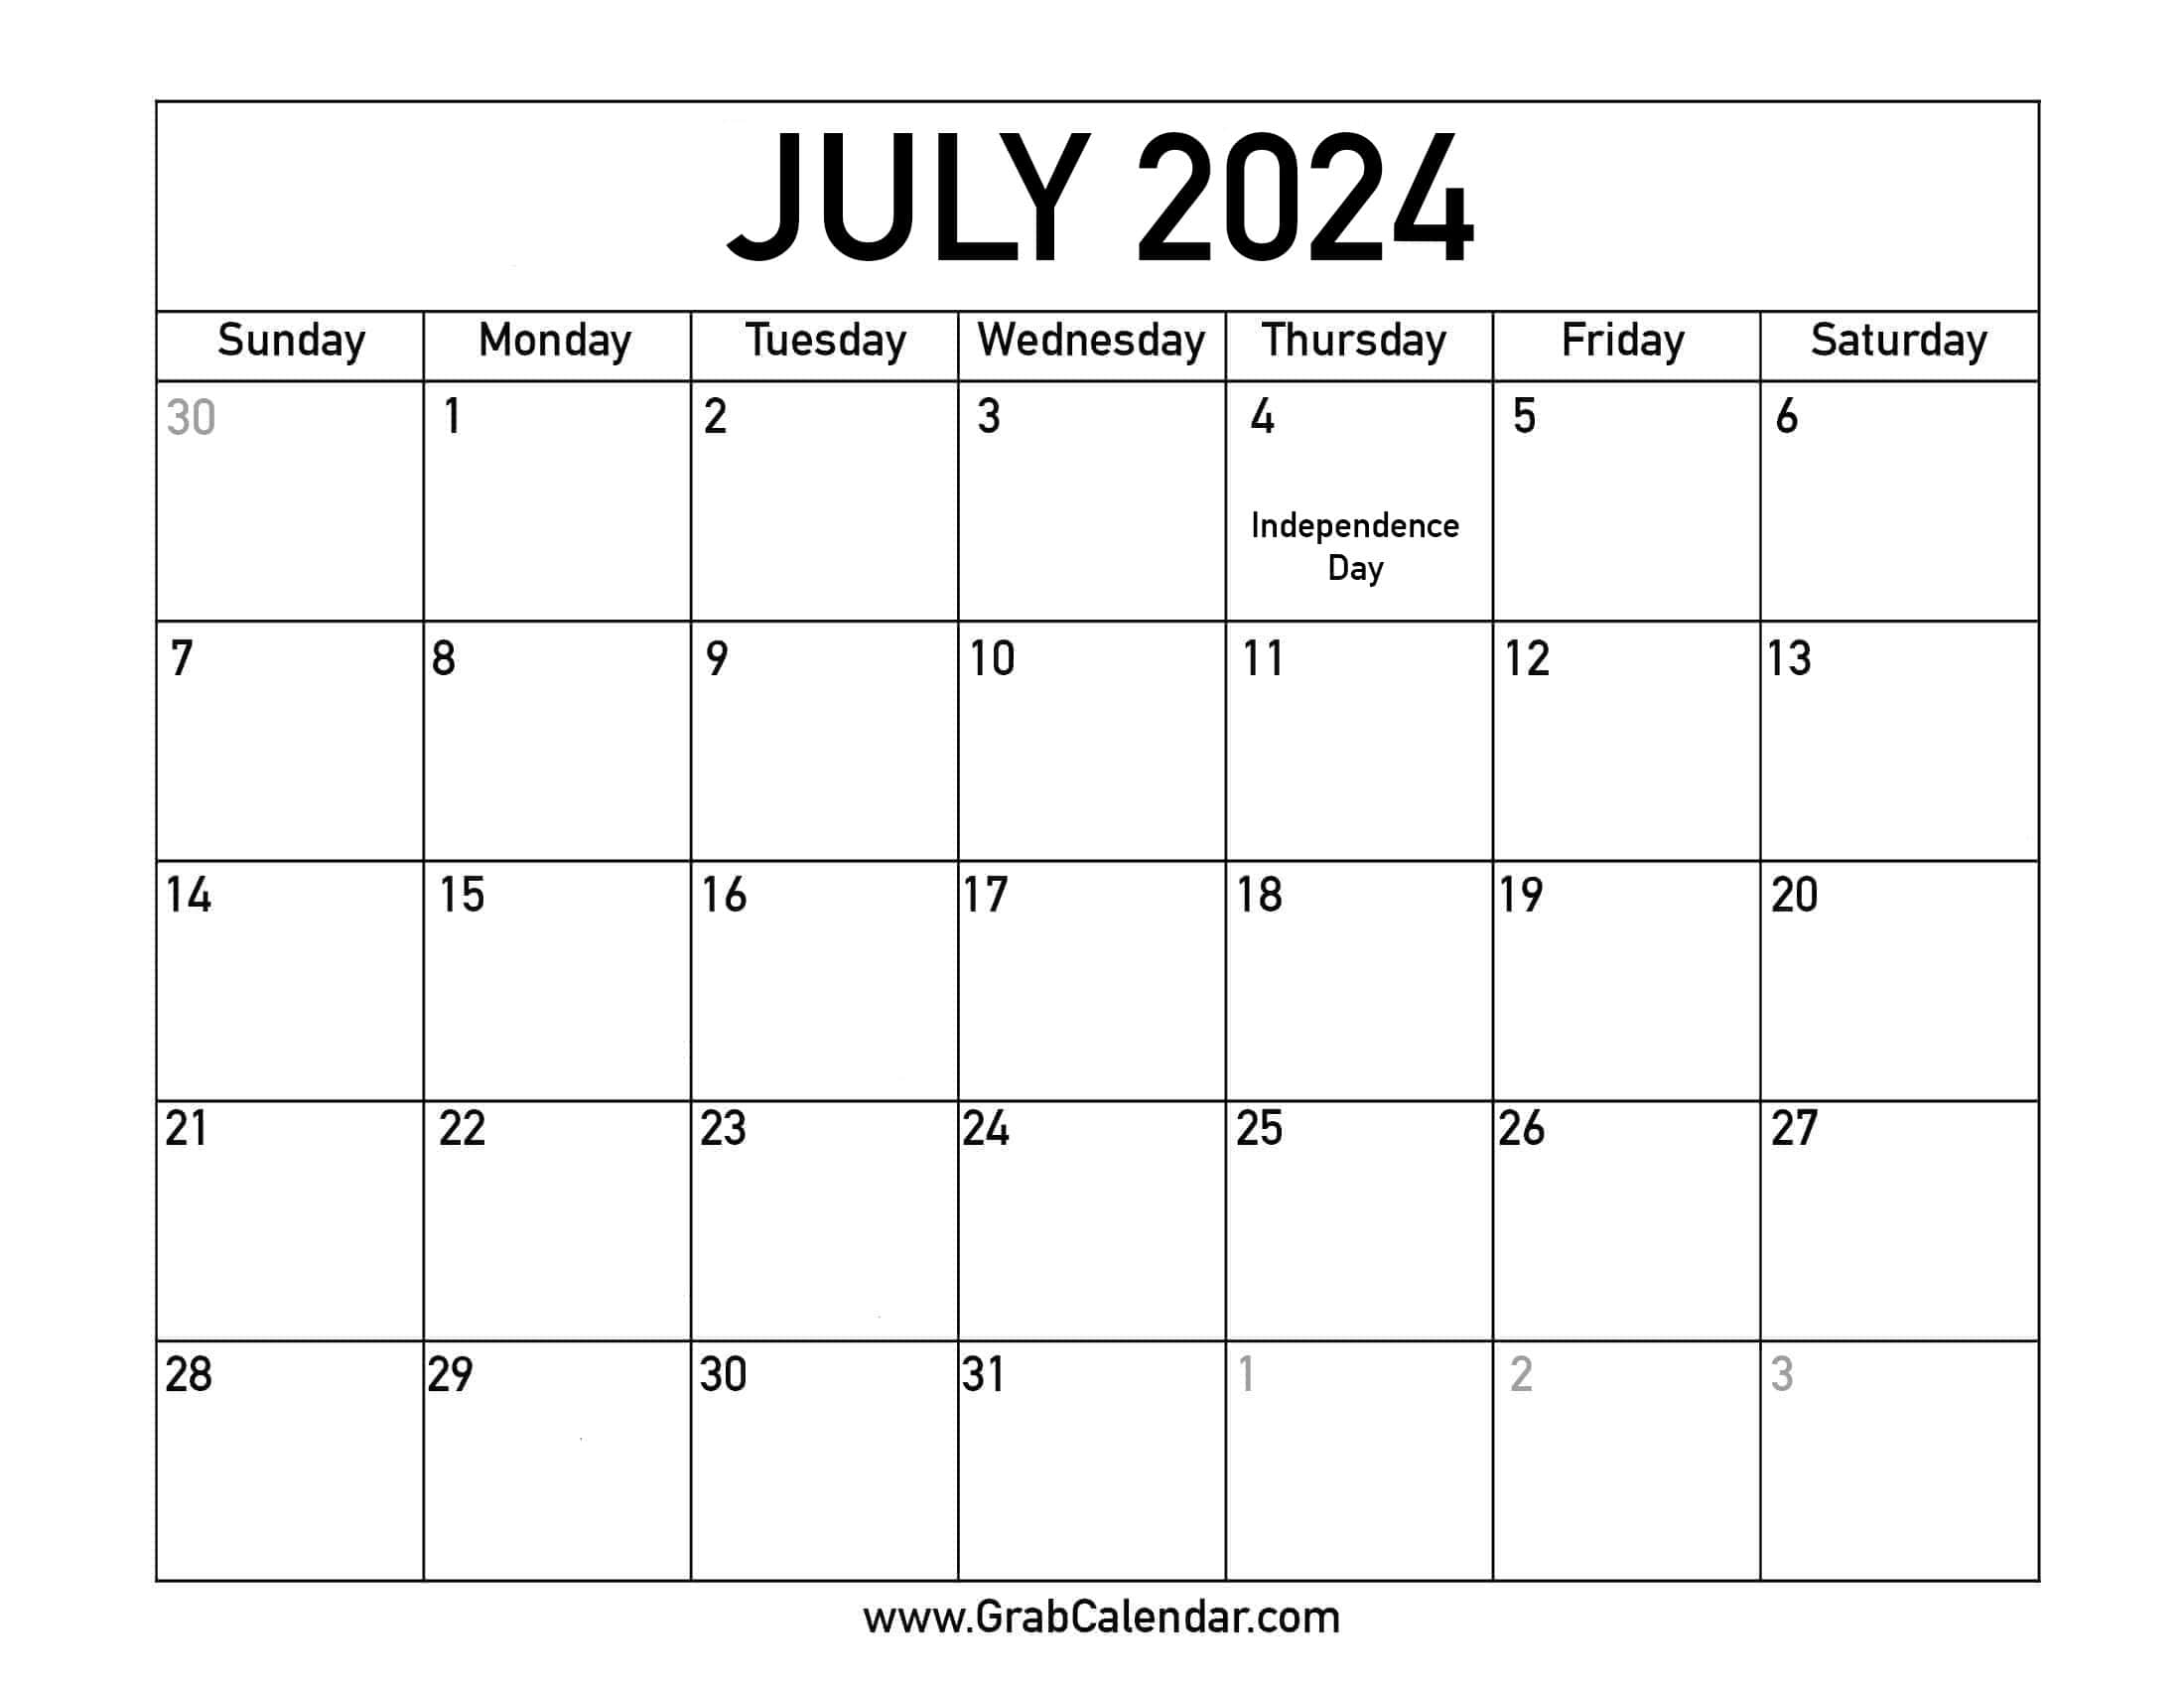 Printable July 2024 Calendar | Show Me The Calendar Month Of July 2024